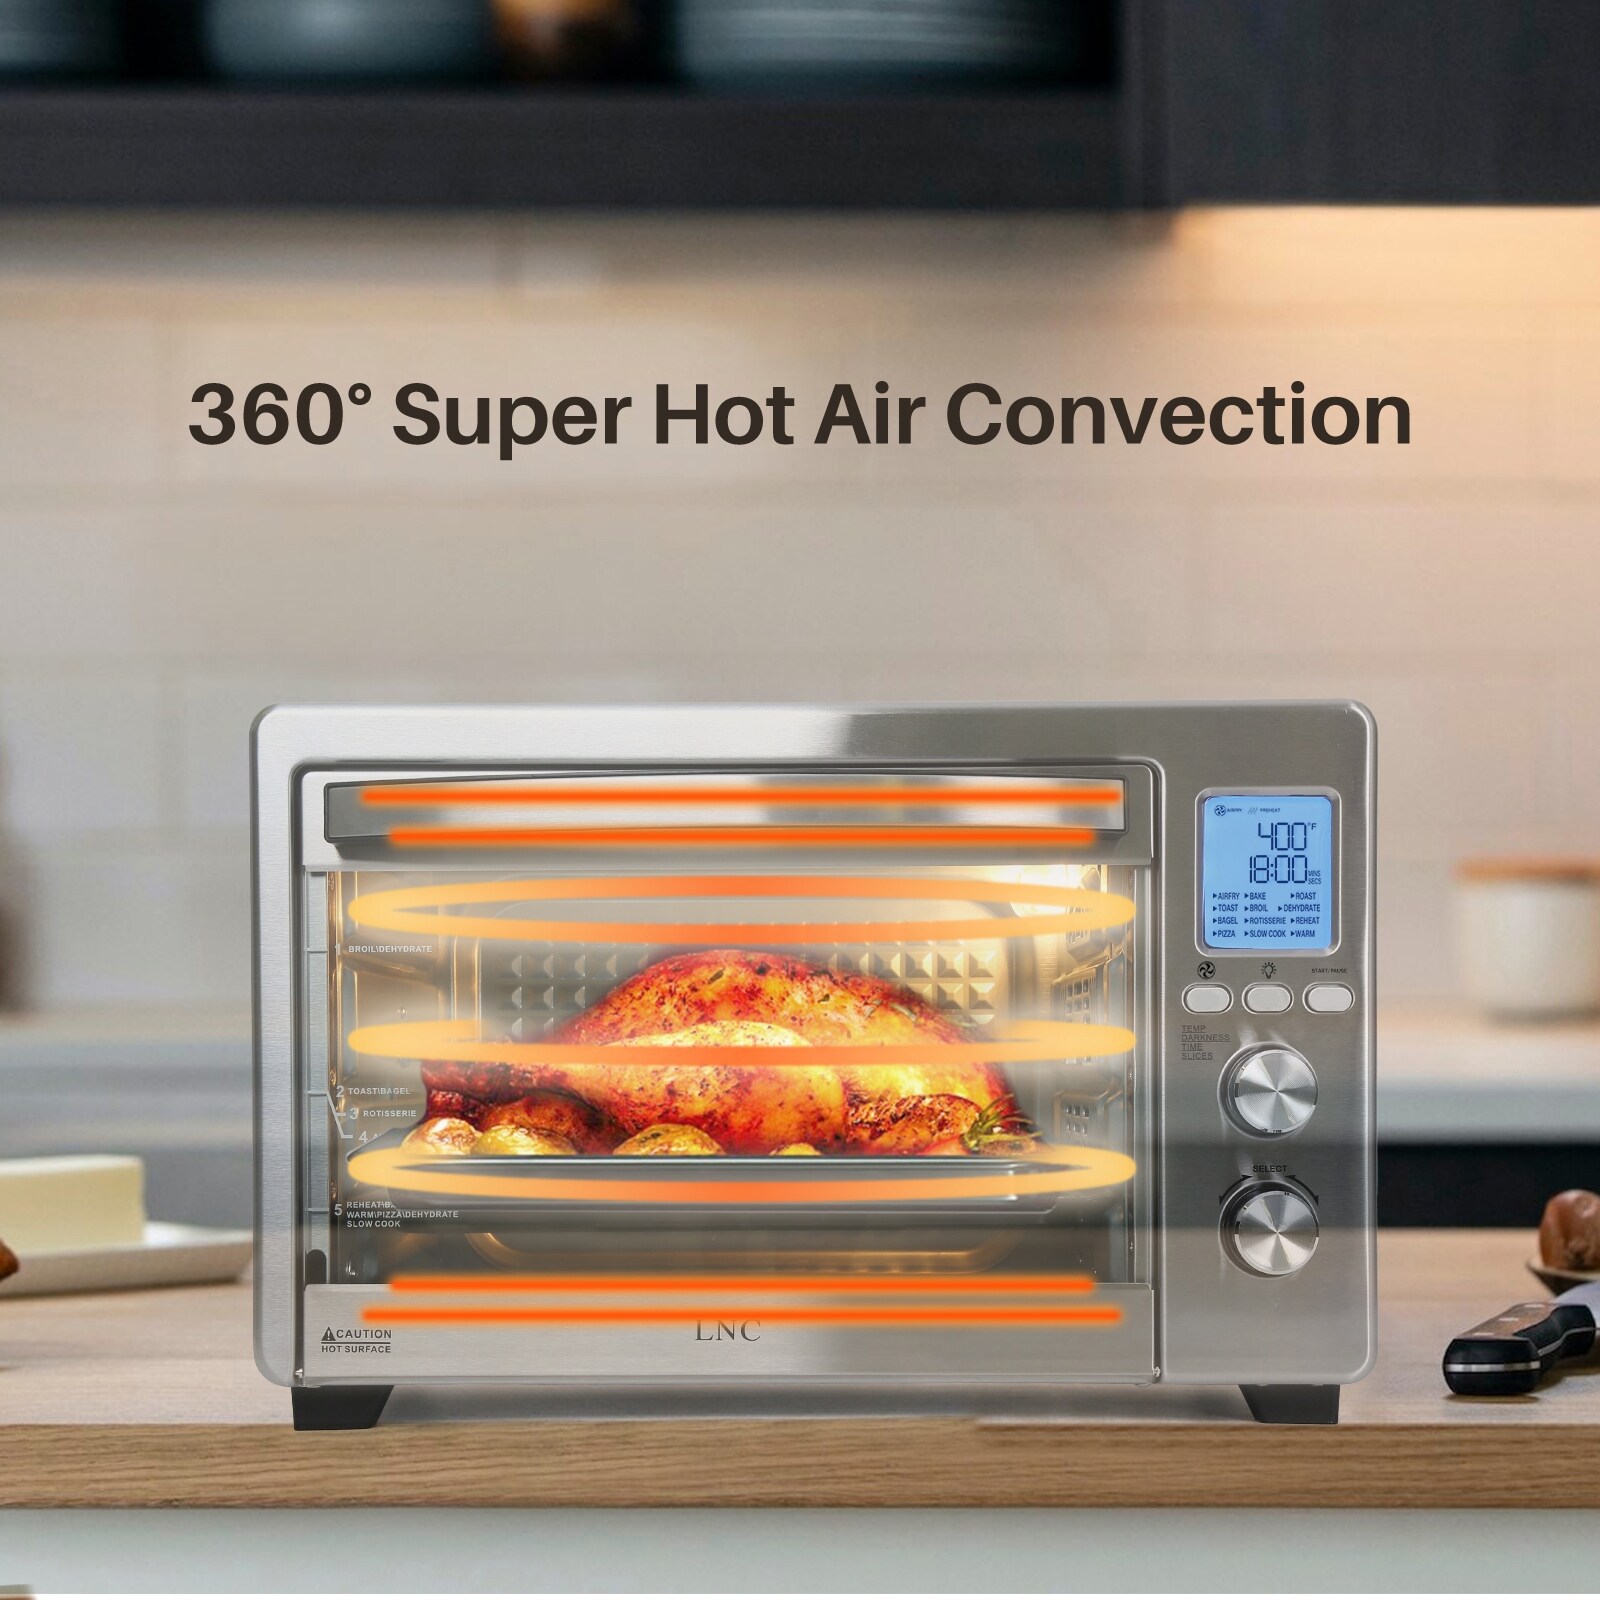 Air Fryer Toaster Oven, 24 QT 8-In-1 Convection Countertop Oven Combination  w/ 4 Accessories, Stainless Steel Finish, 1700W - Bed Bath & Beyond -  37927127